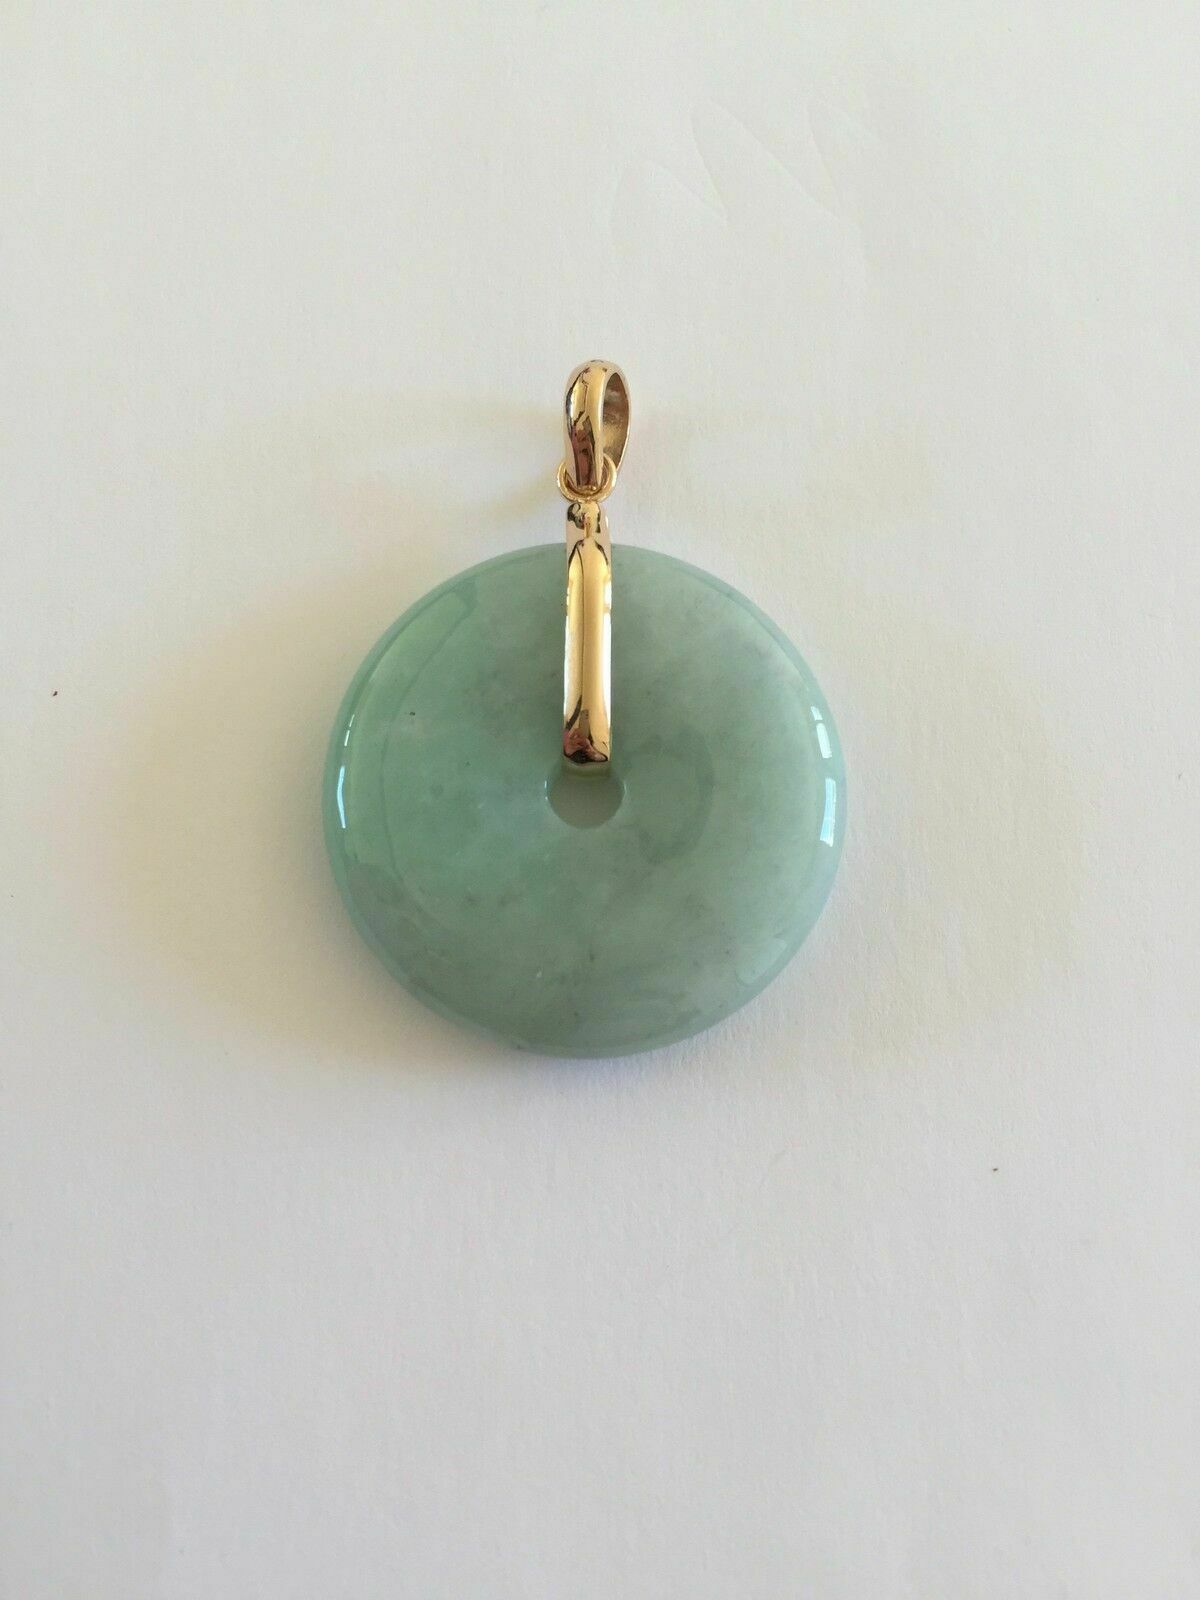 18K Solid Yellow Gold White Light Green Donut Round Natural Real Jade Pendant